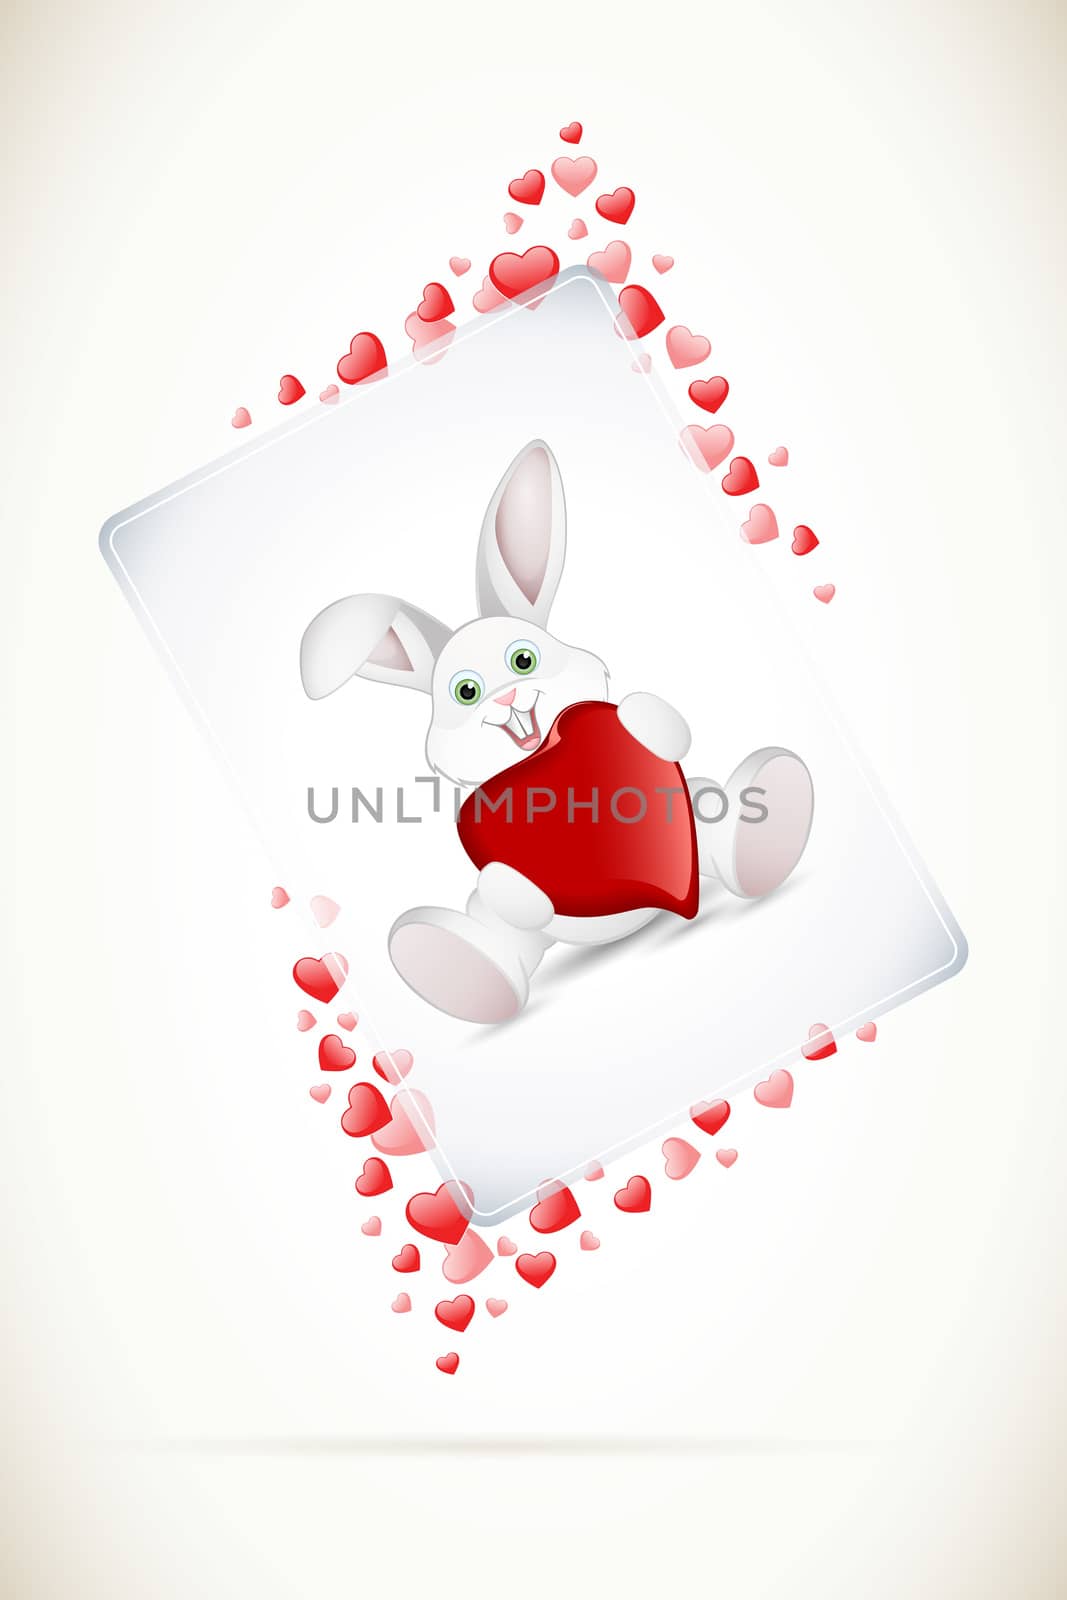 Valentines Day Greeting Card with Rabbit